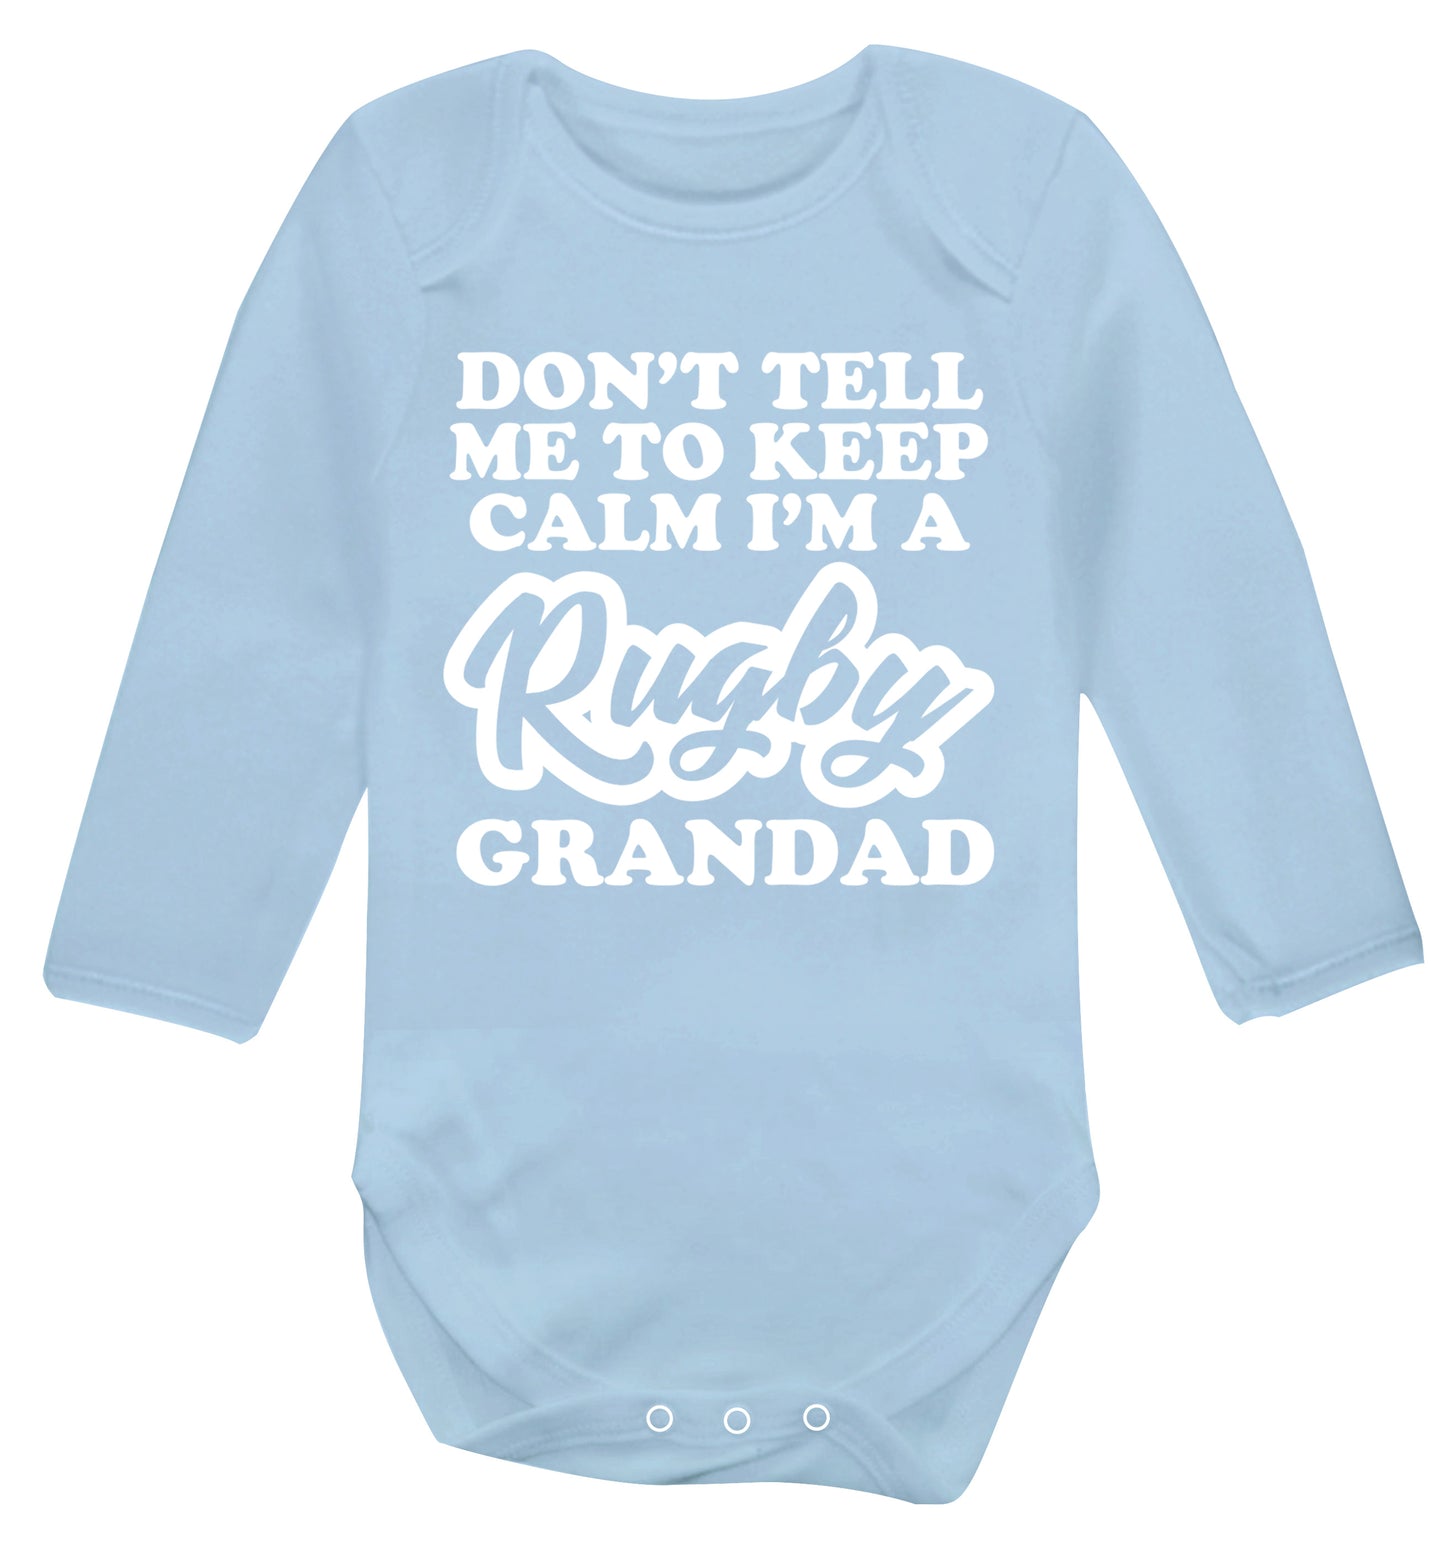 Don't tell me to keep calm I'm a rugby dad Baby Vest long sleeved pale blue 6-12 months